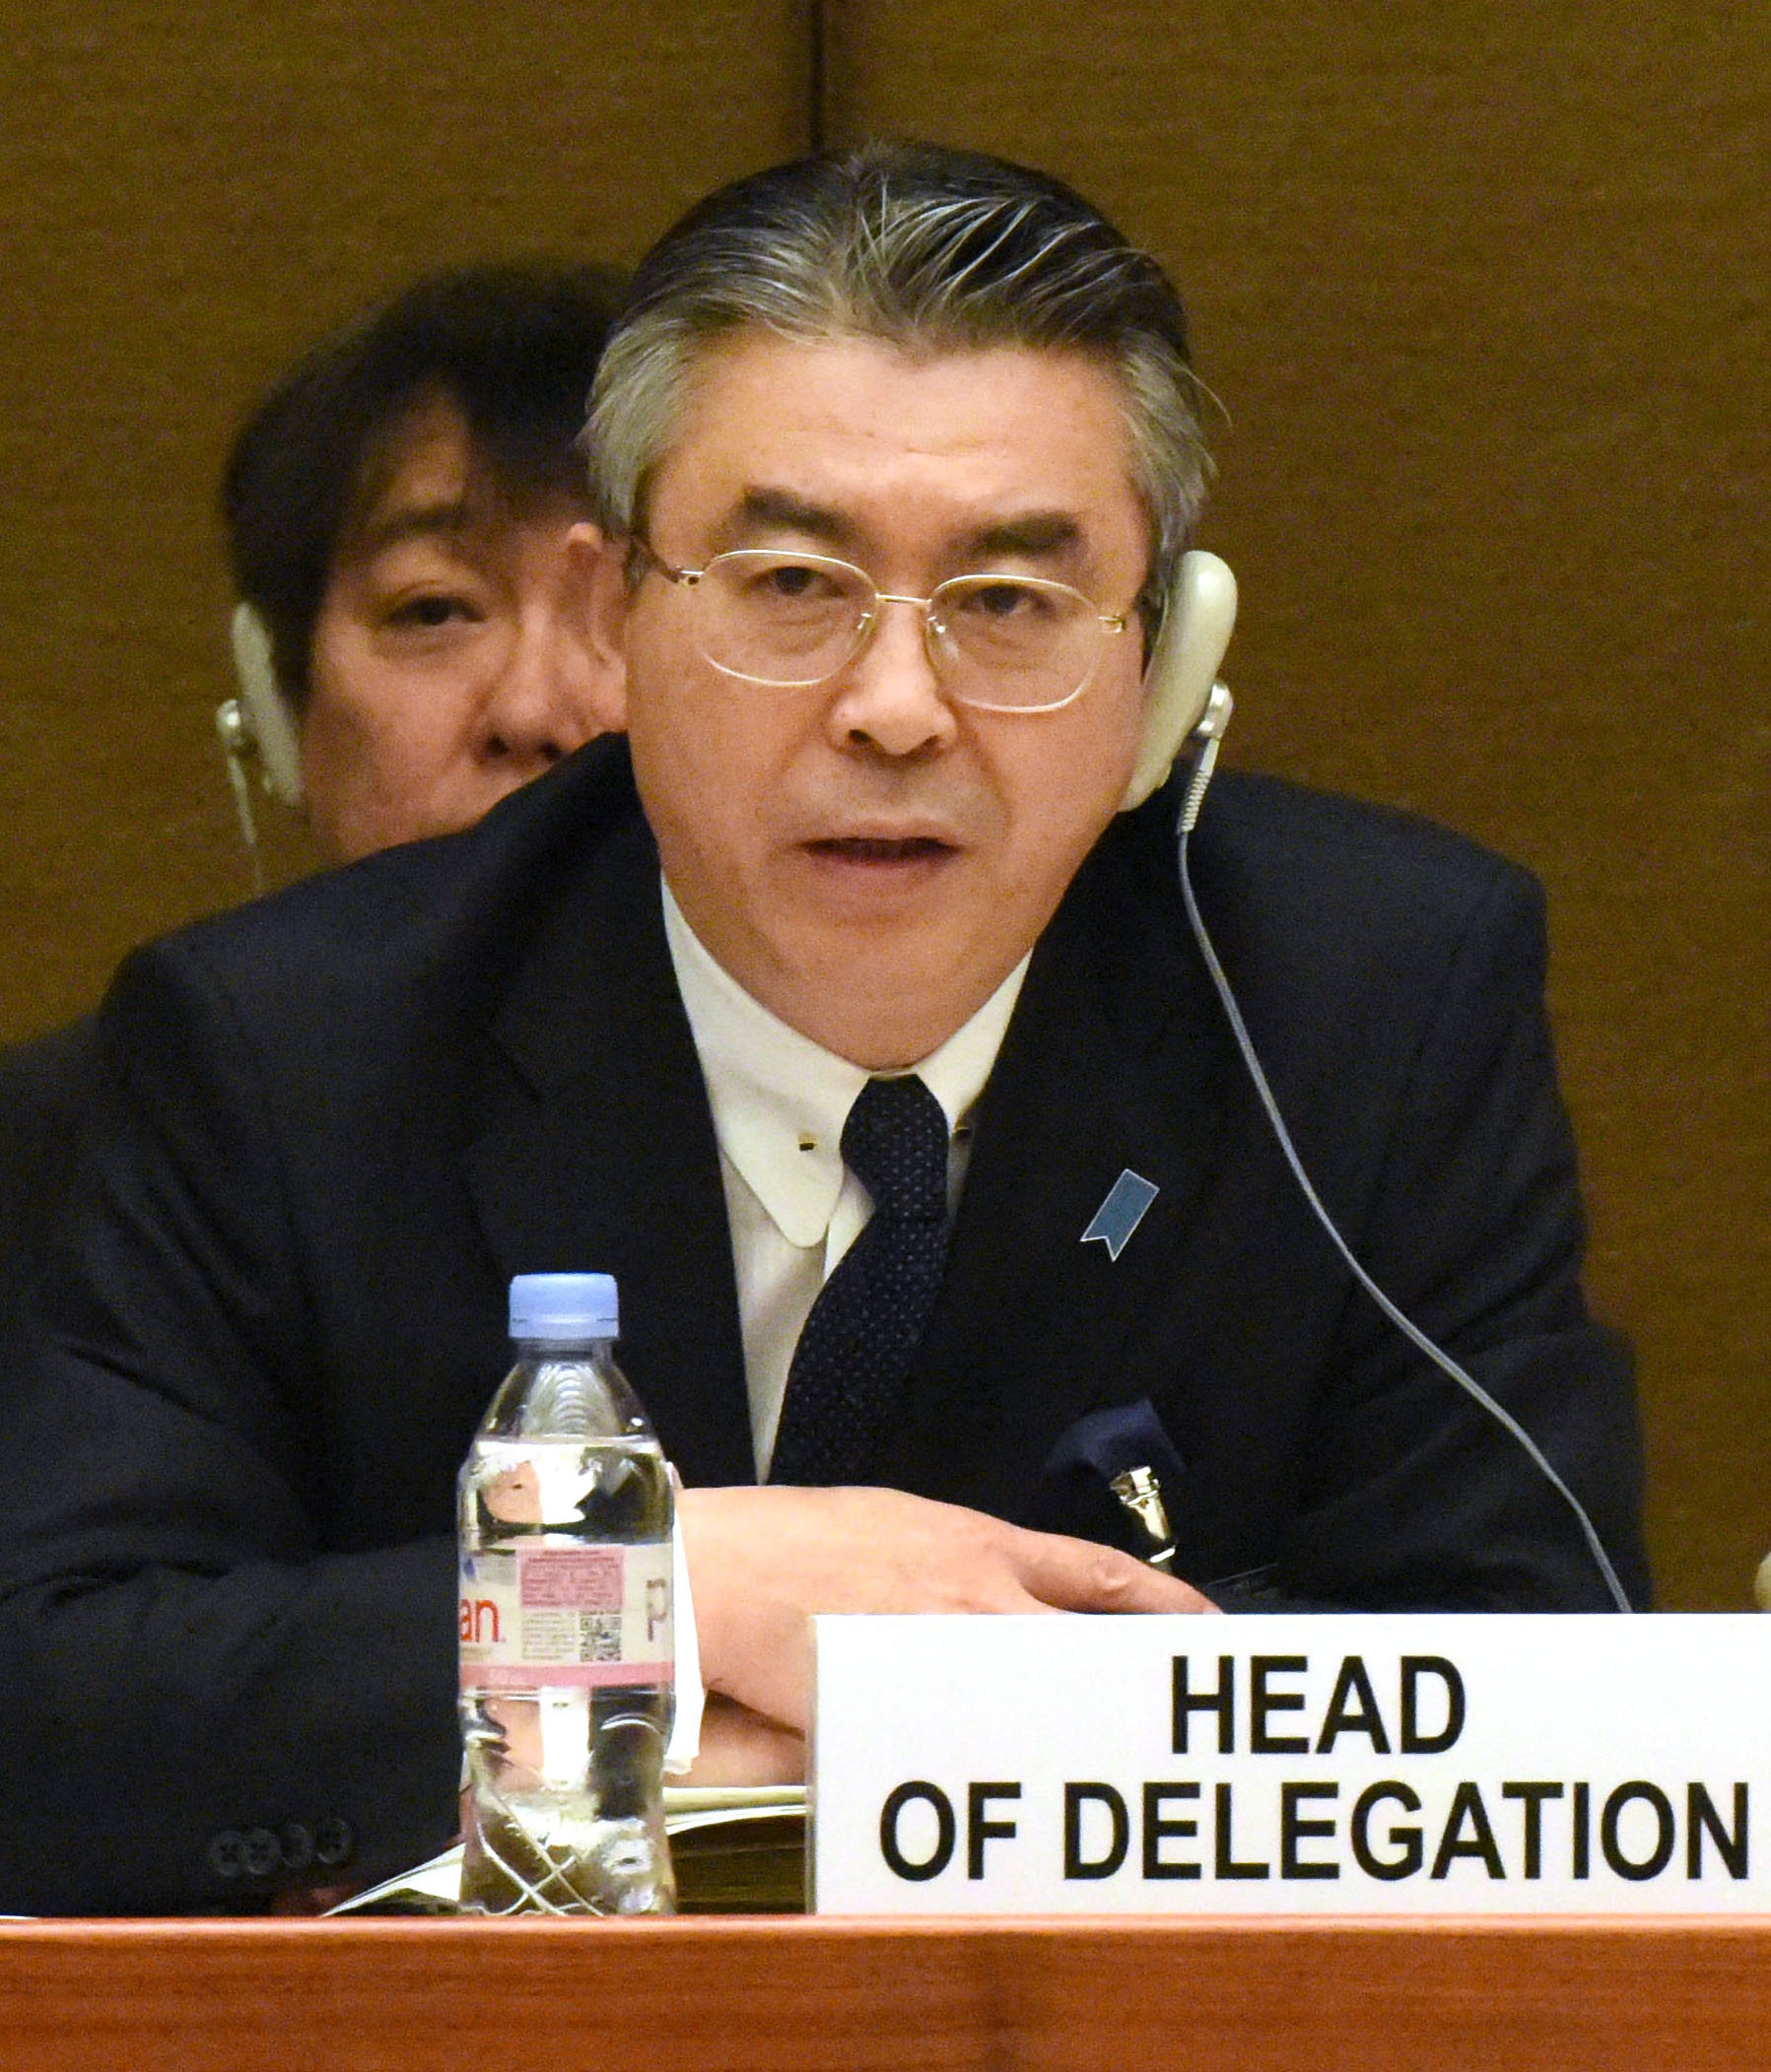 Foreign Ministry's deputy chief Sugiyama to become new top bureaucrat